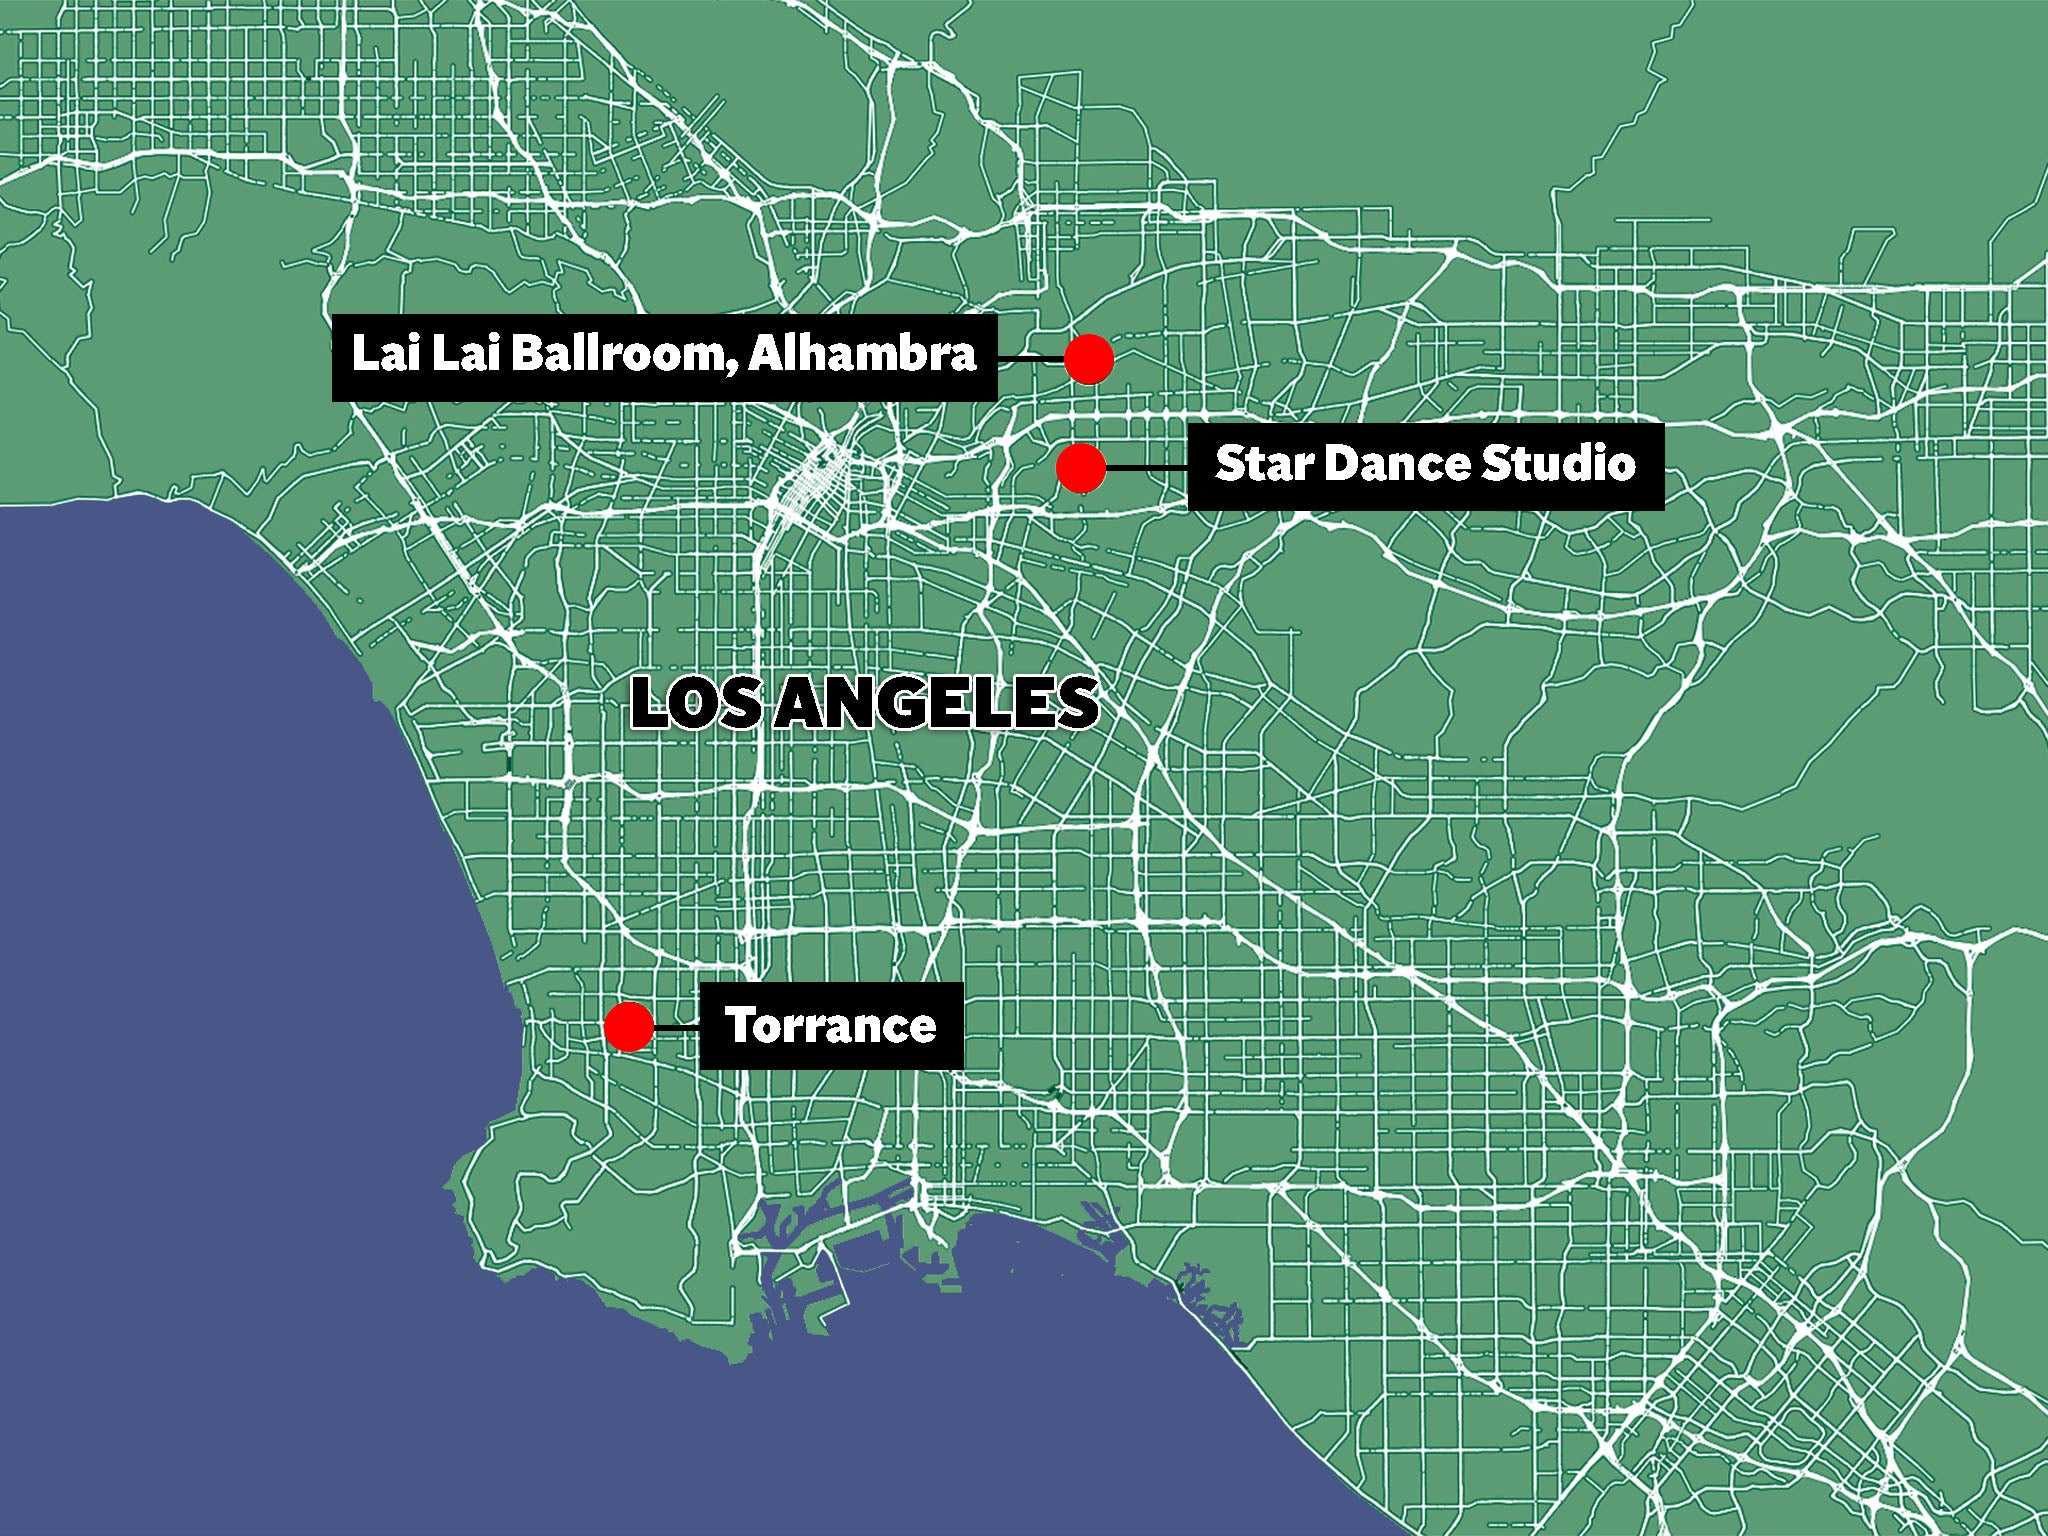 Map showing locations of Star Dance Studio, where gunman Huu Can Tran shot dead 10 people; the Lai Lai Ballroom, where he was disarmed by members of the public; and Torrance, where his van was stopped by police